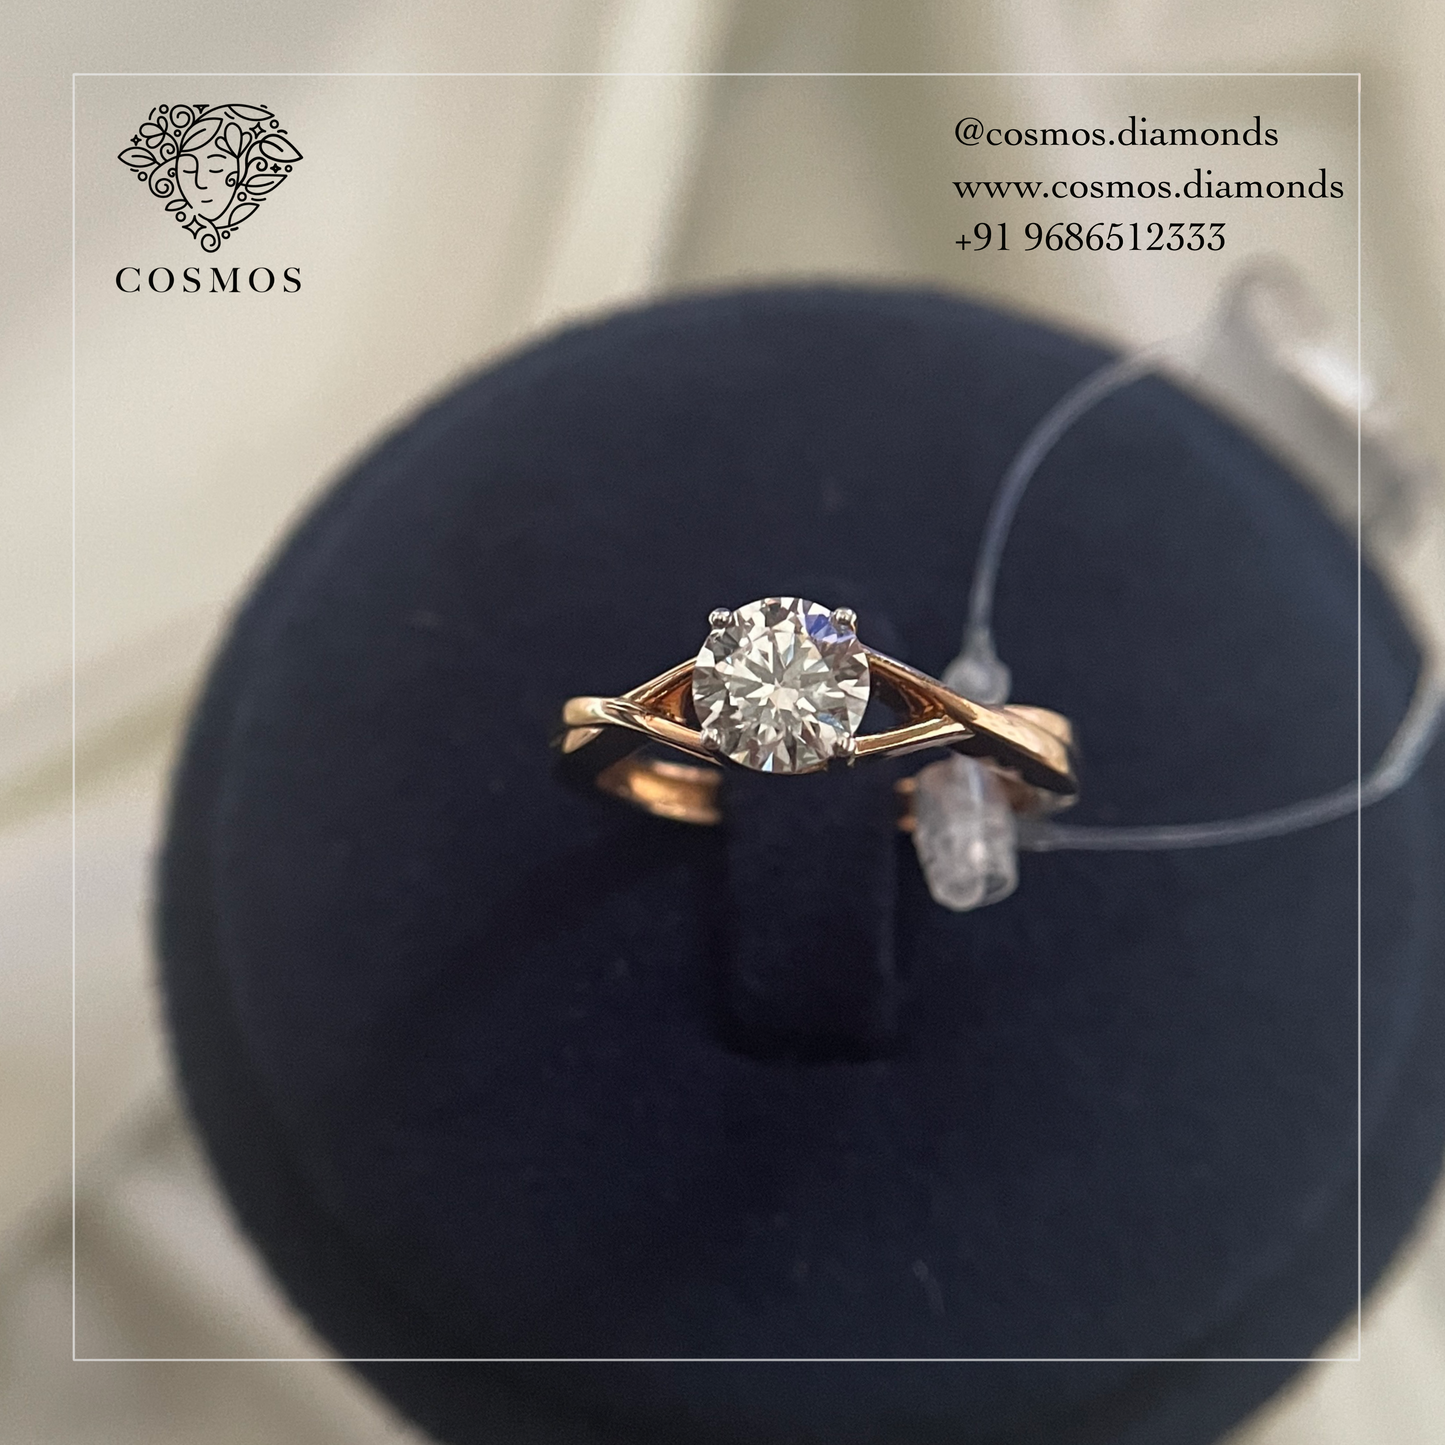 Twisted solitaire diamond ring